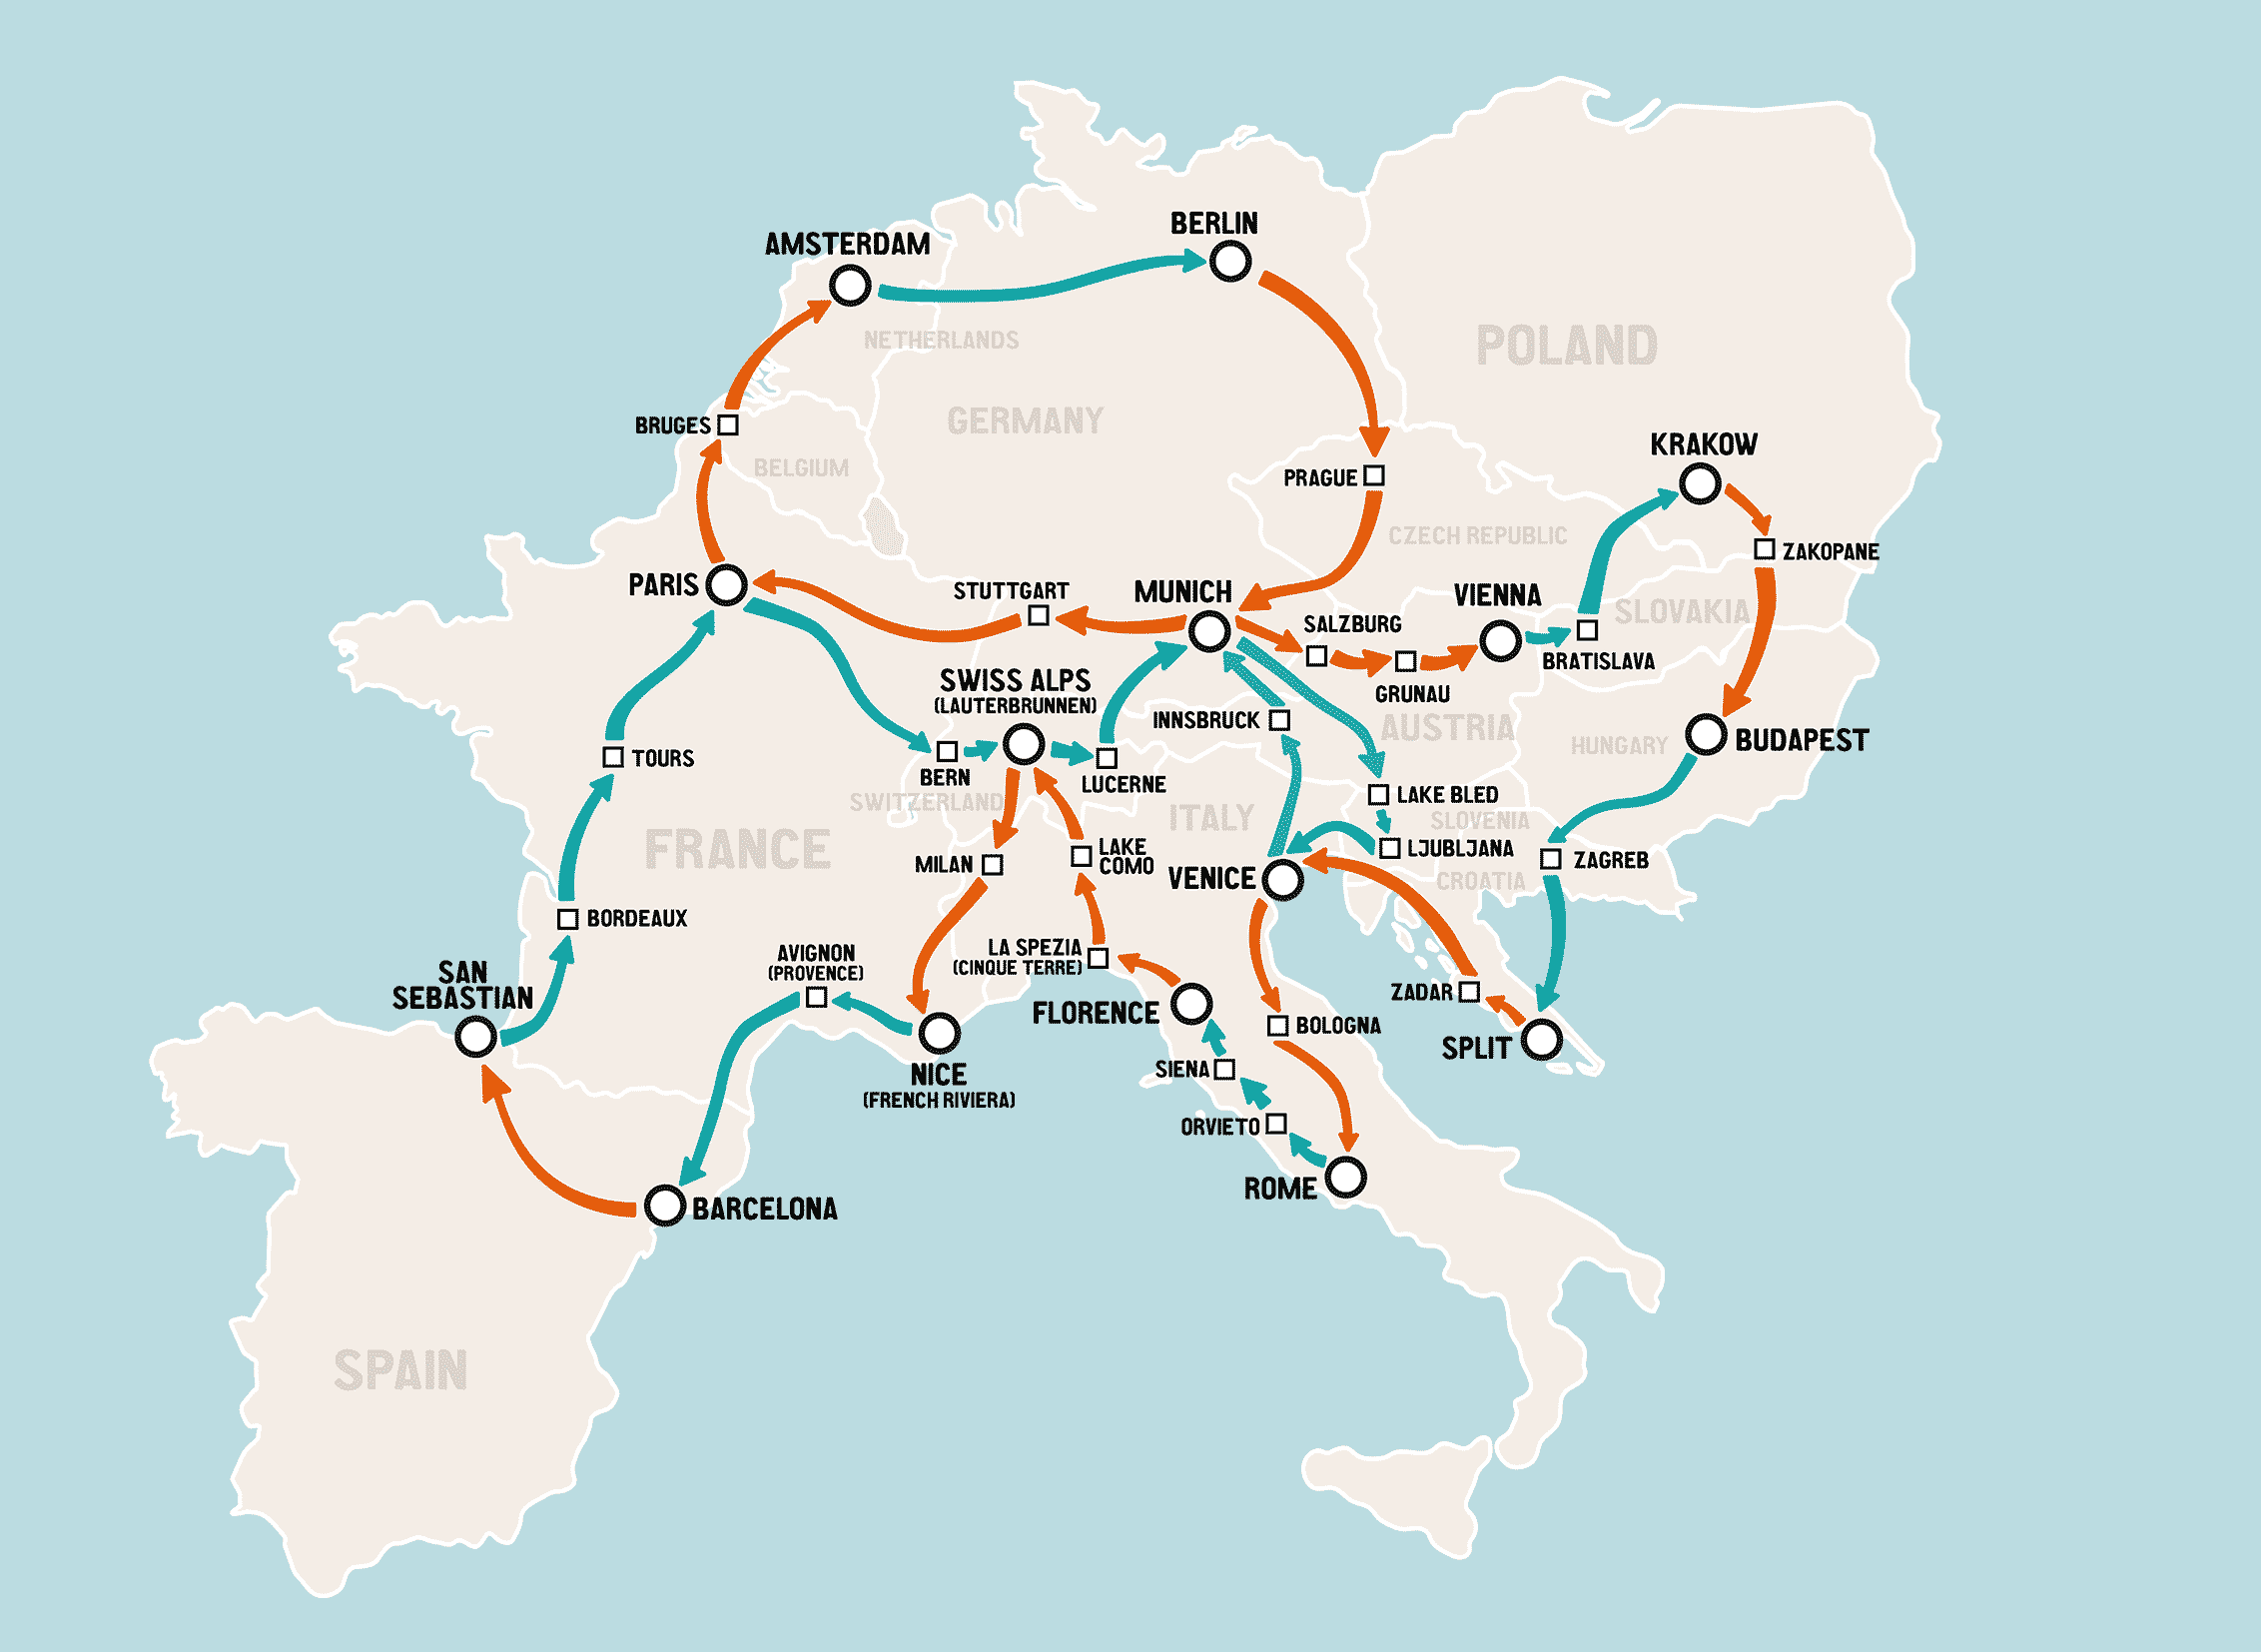 The Hop-on Hop-off Network Route Map